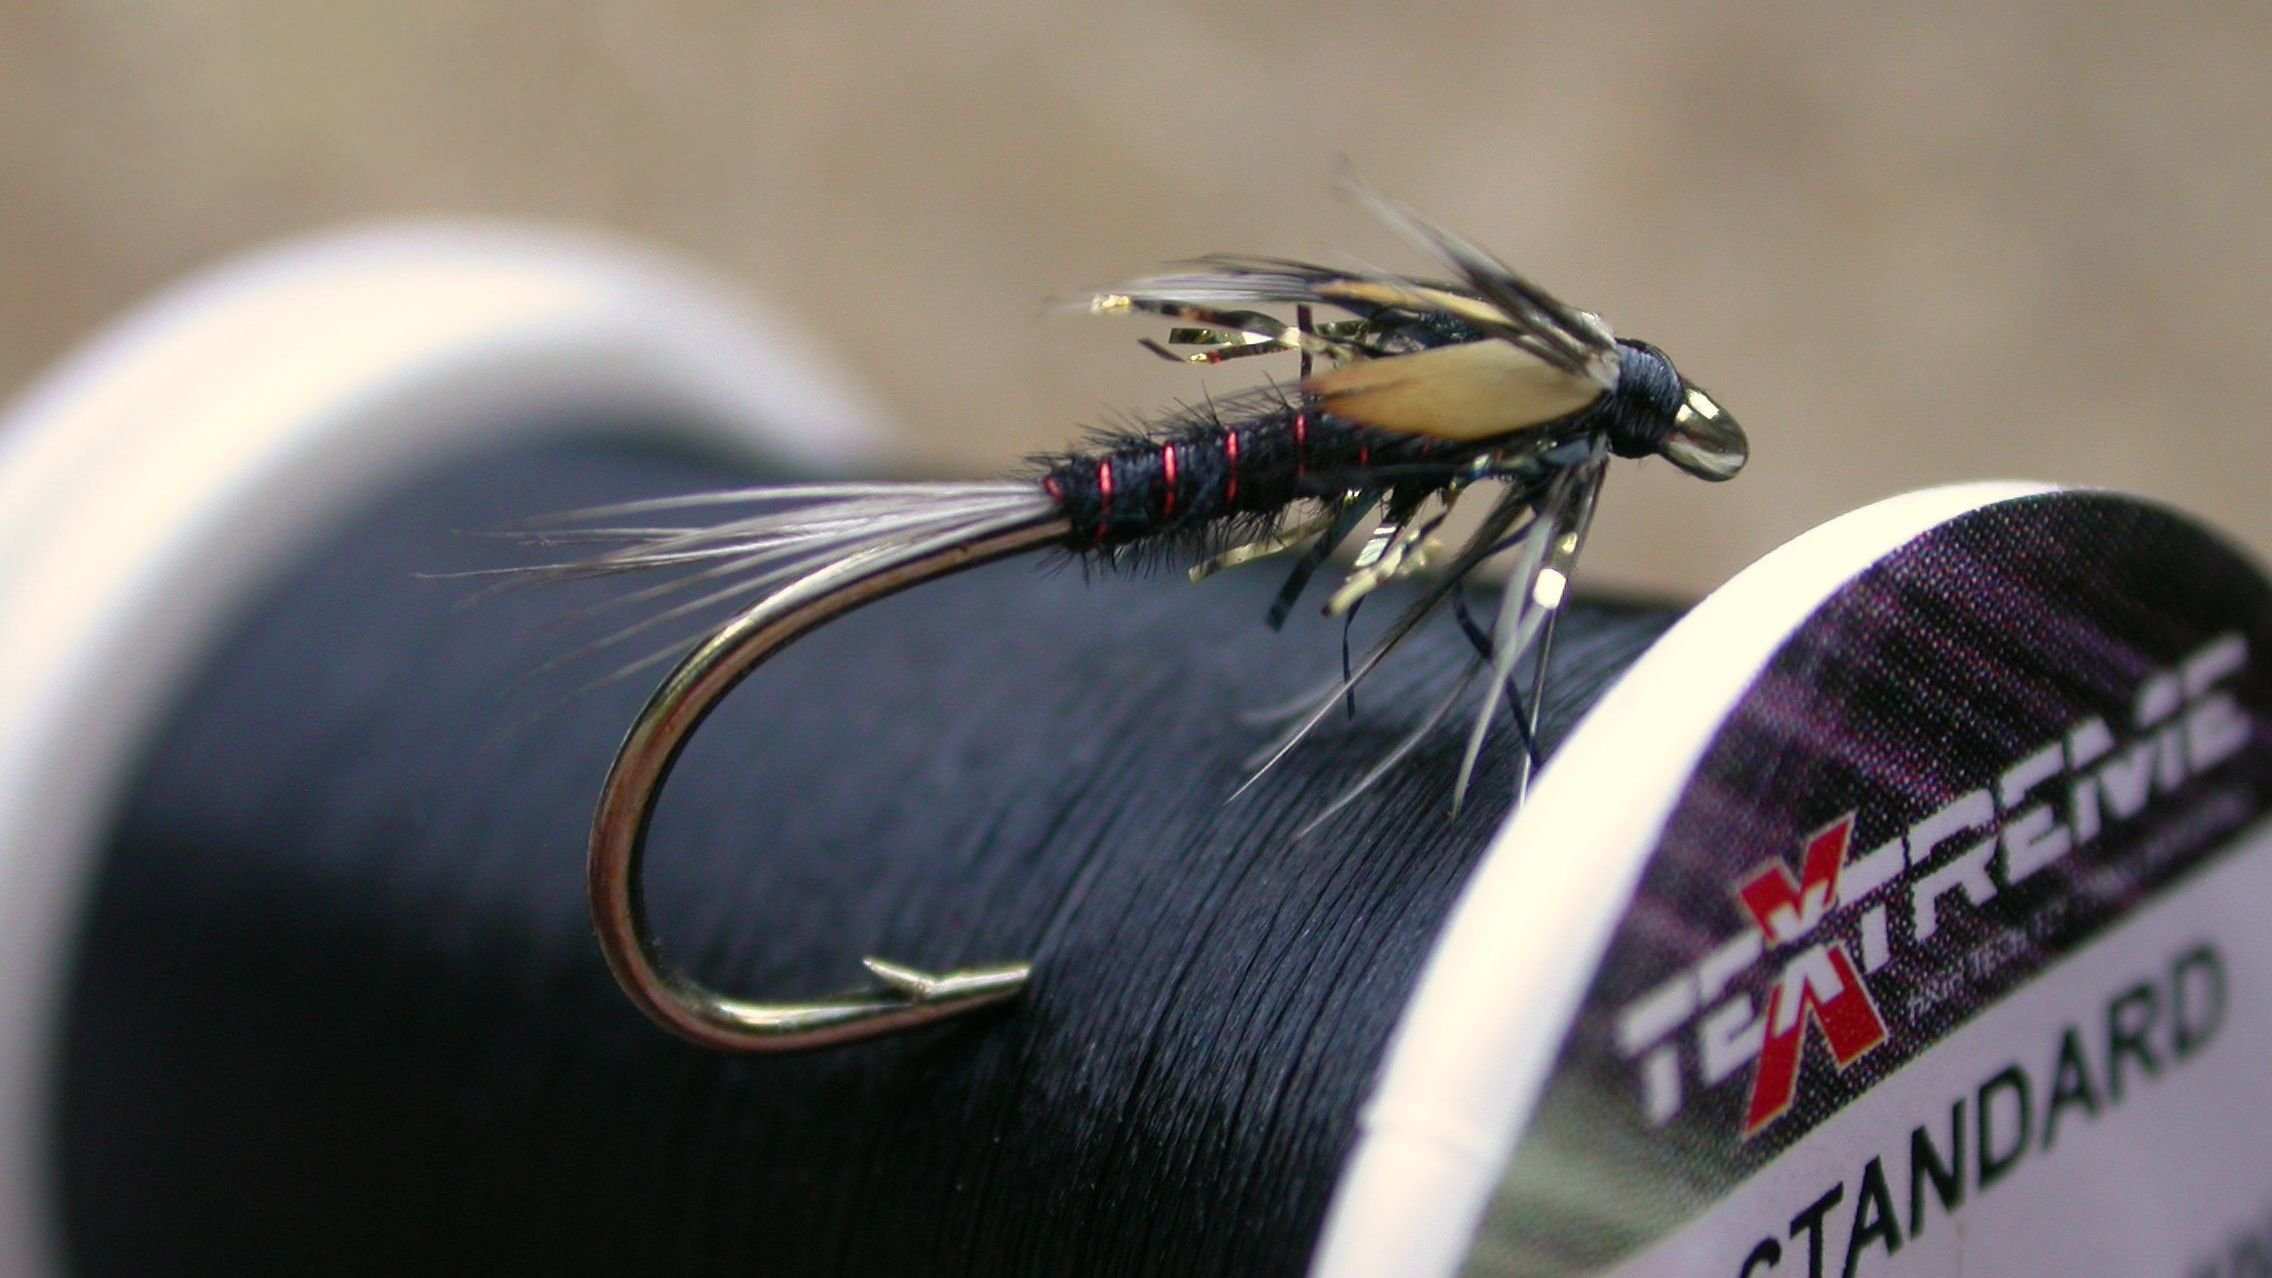 Advice for fly fishing Small Still Waters For Trout